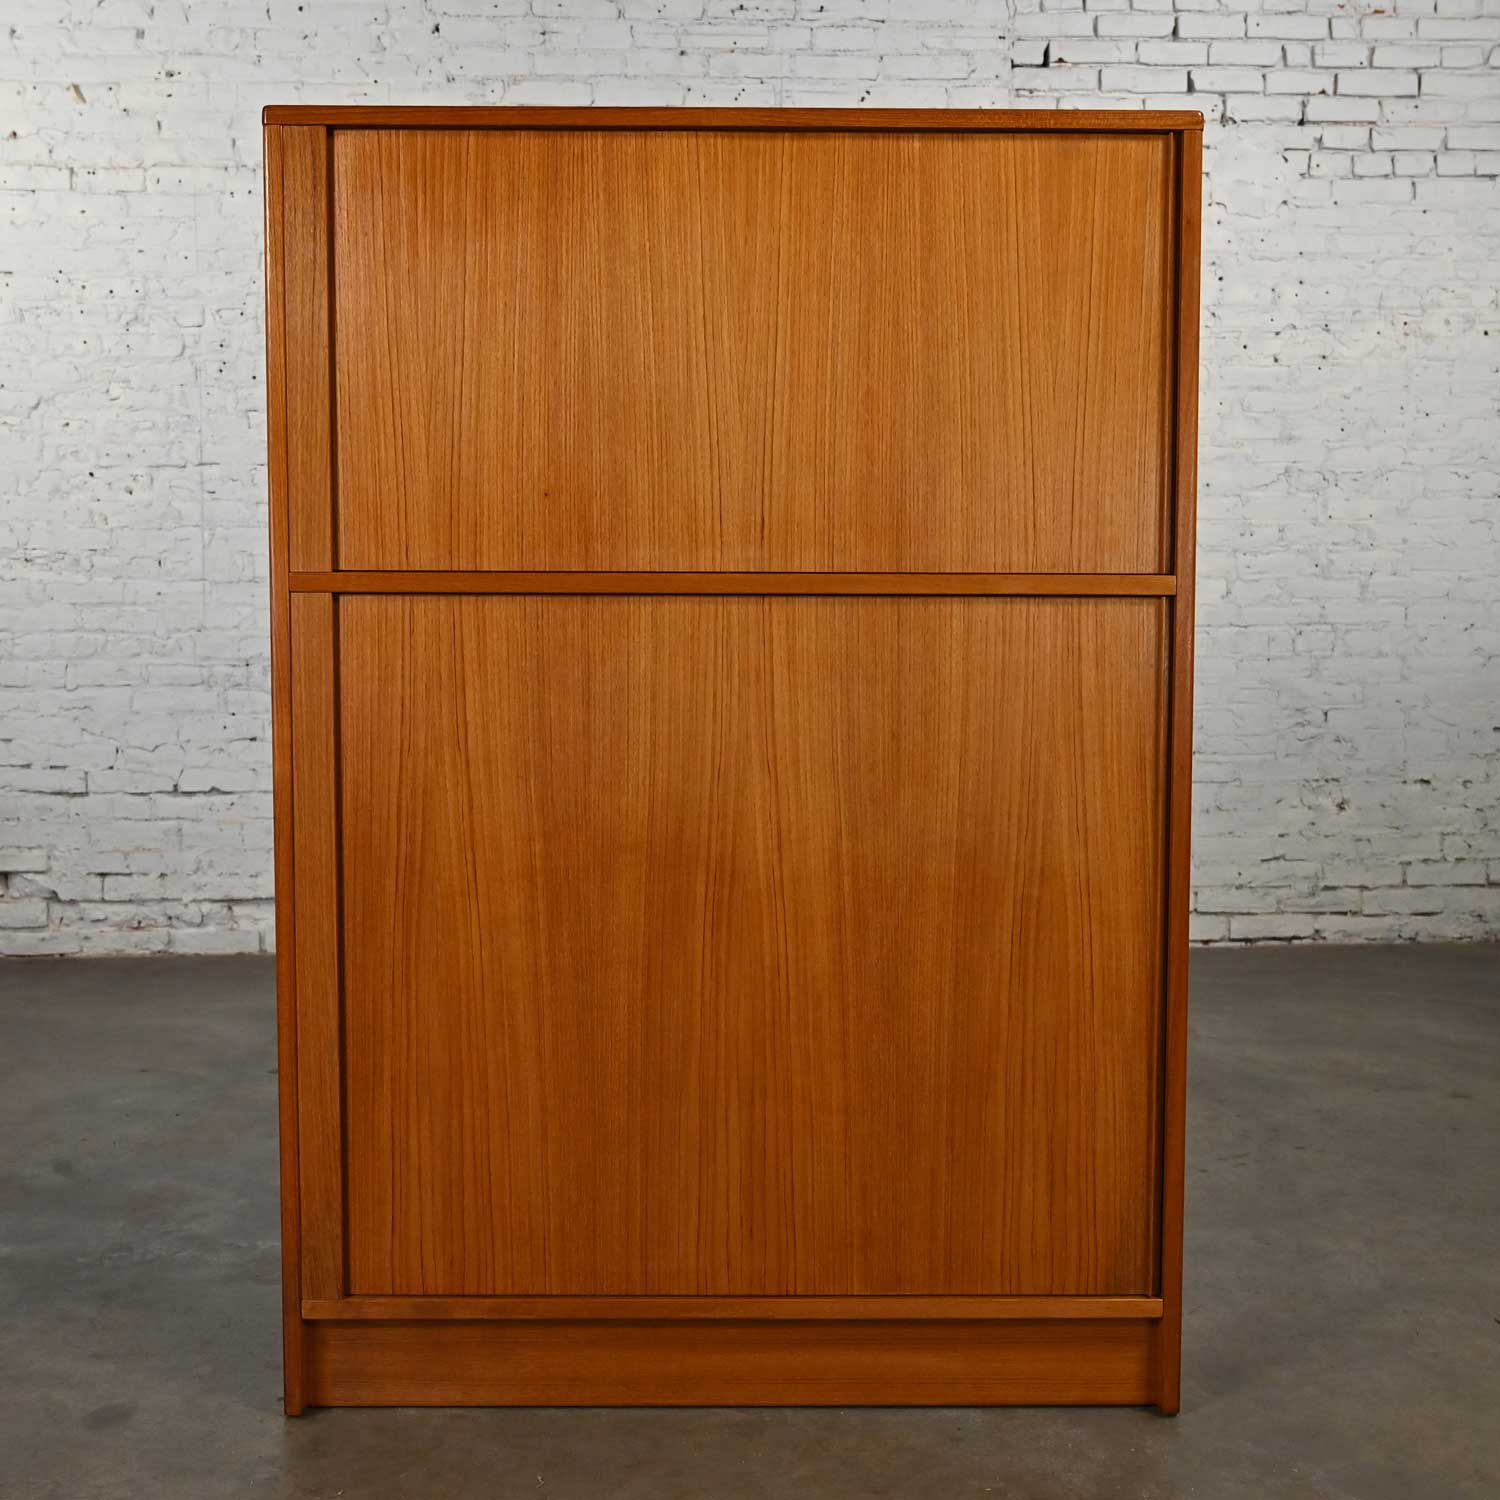 Awesome vintage Scandinavian Modern teak double height vertical tambour door Gentleman’s chest or cabinet. Beautiful condition, keeping in mind that this is vintage and not new so will have signs of use and wear. There is a bit of sun fading to the